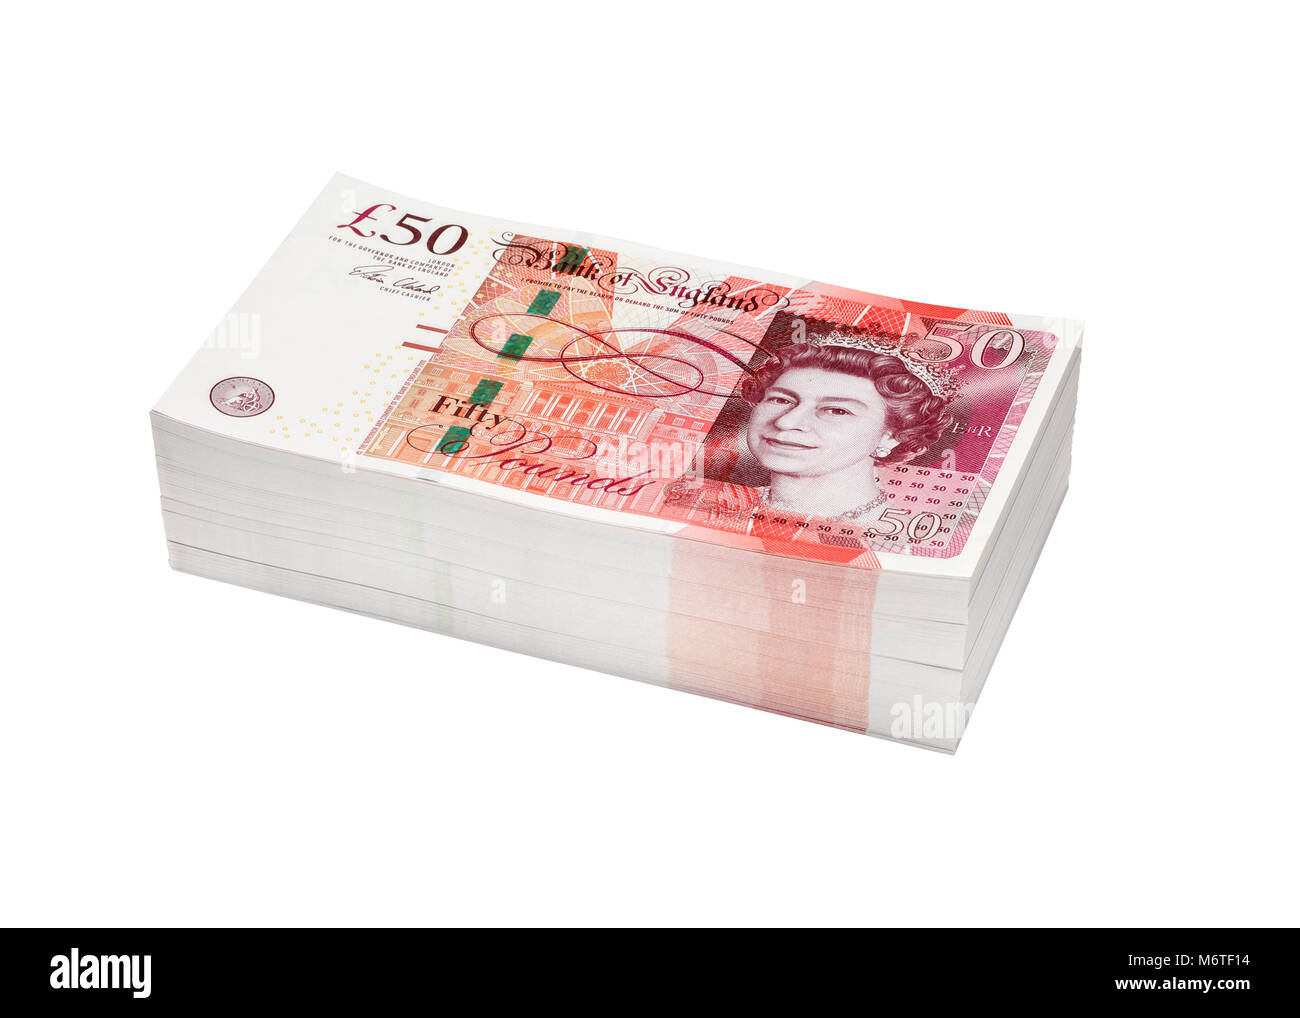 A wad or pile of money made up of fifty pound notes Stock Photo